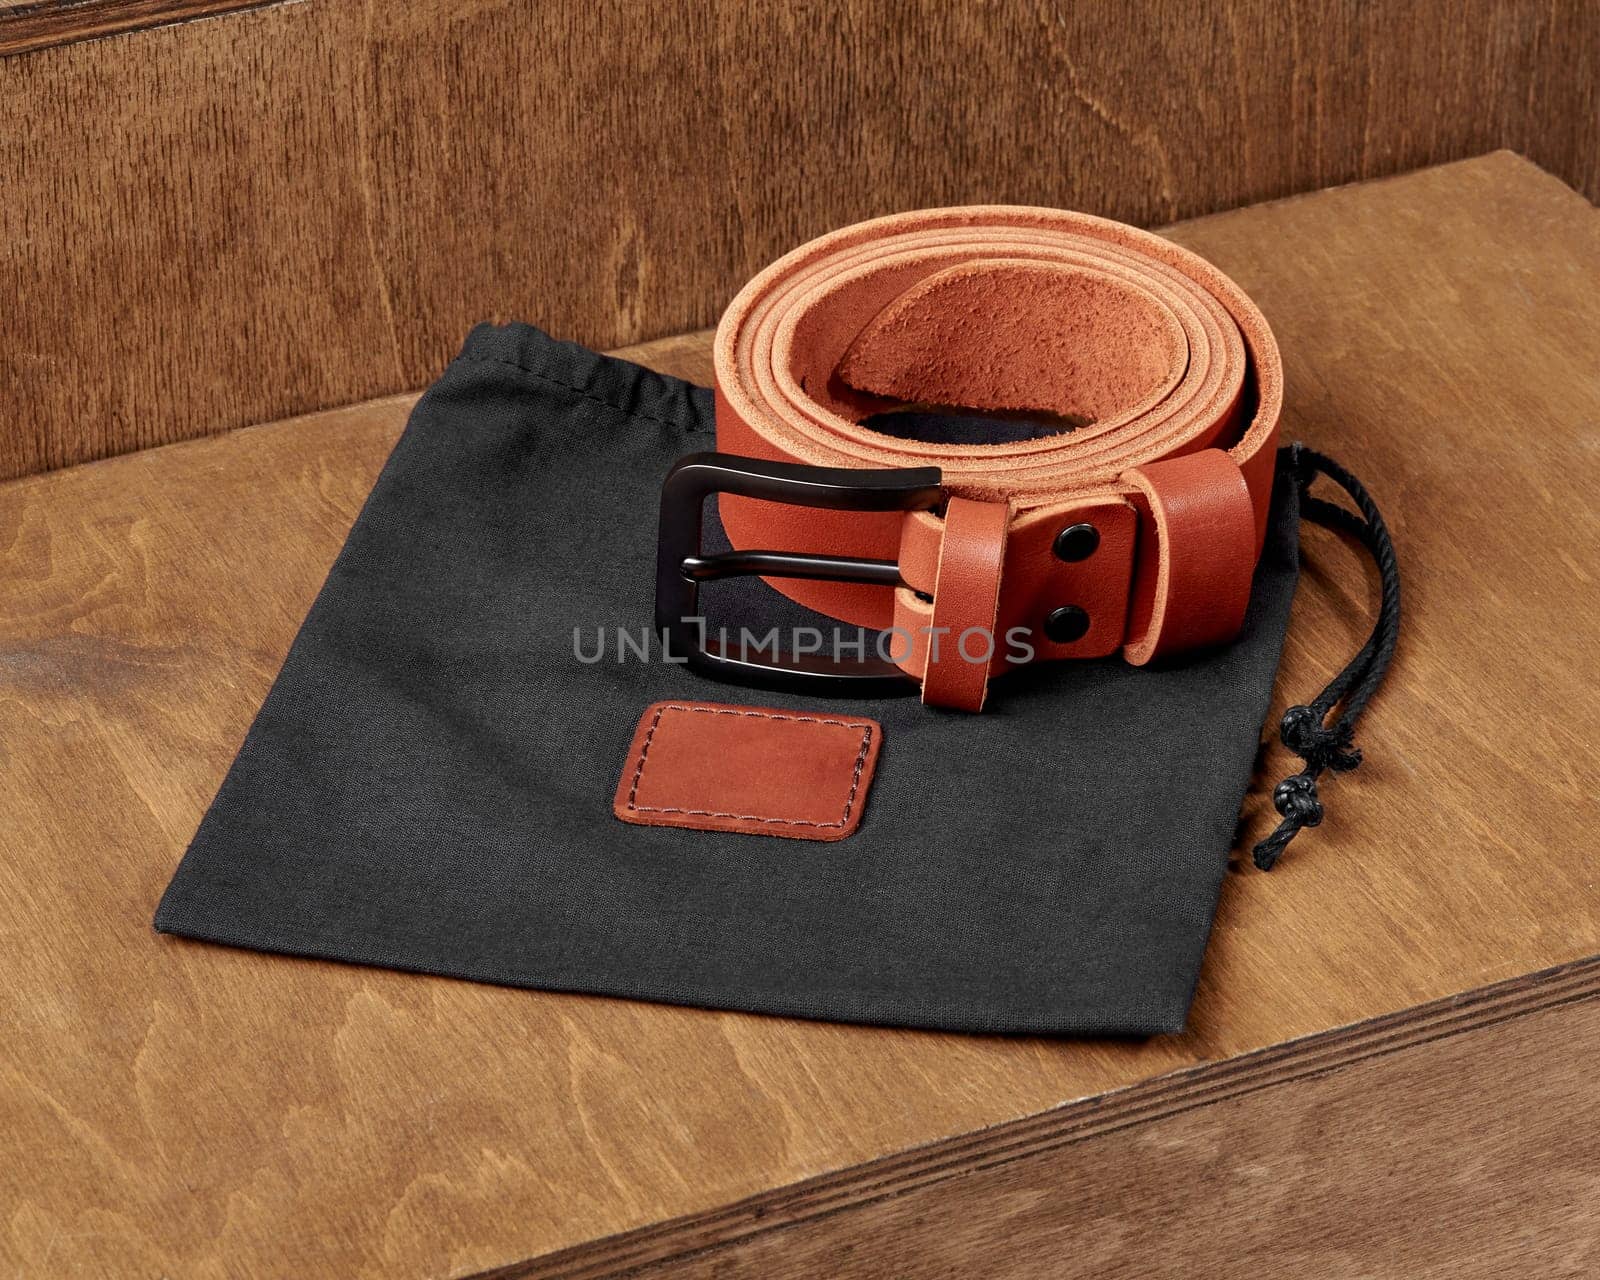 Custom copper-colored leather belt with DAD embossed on loop, accompanied by black fabric drawstring pouch, displayed on rustic wooden stand. Stylish personalized handcrafted accessory